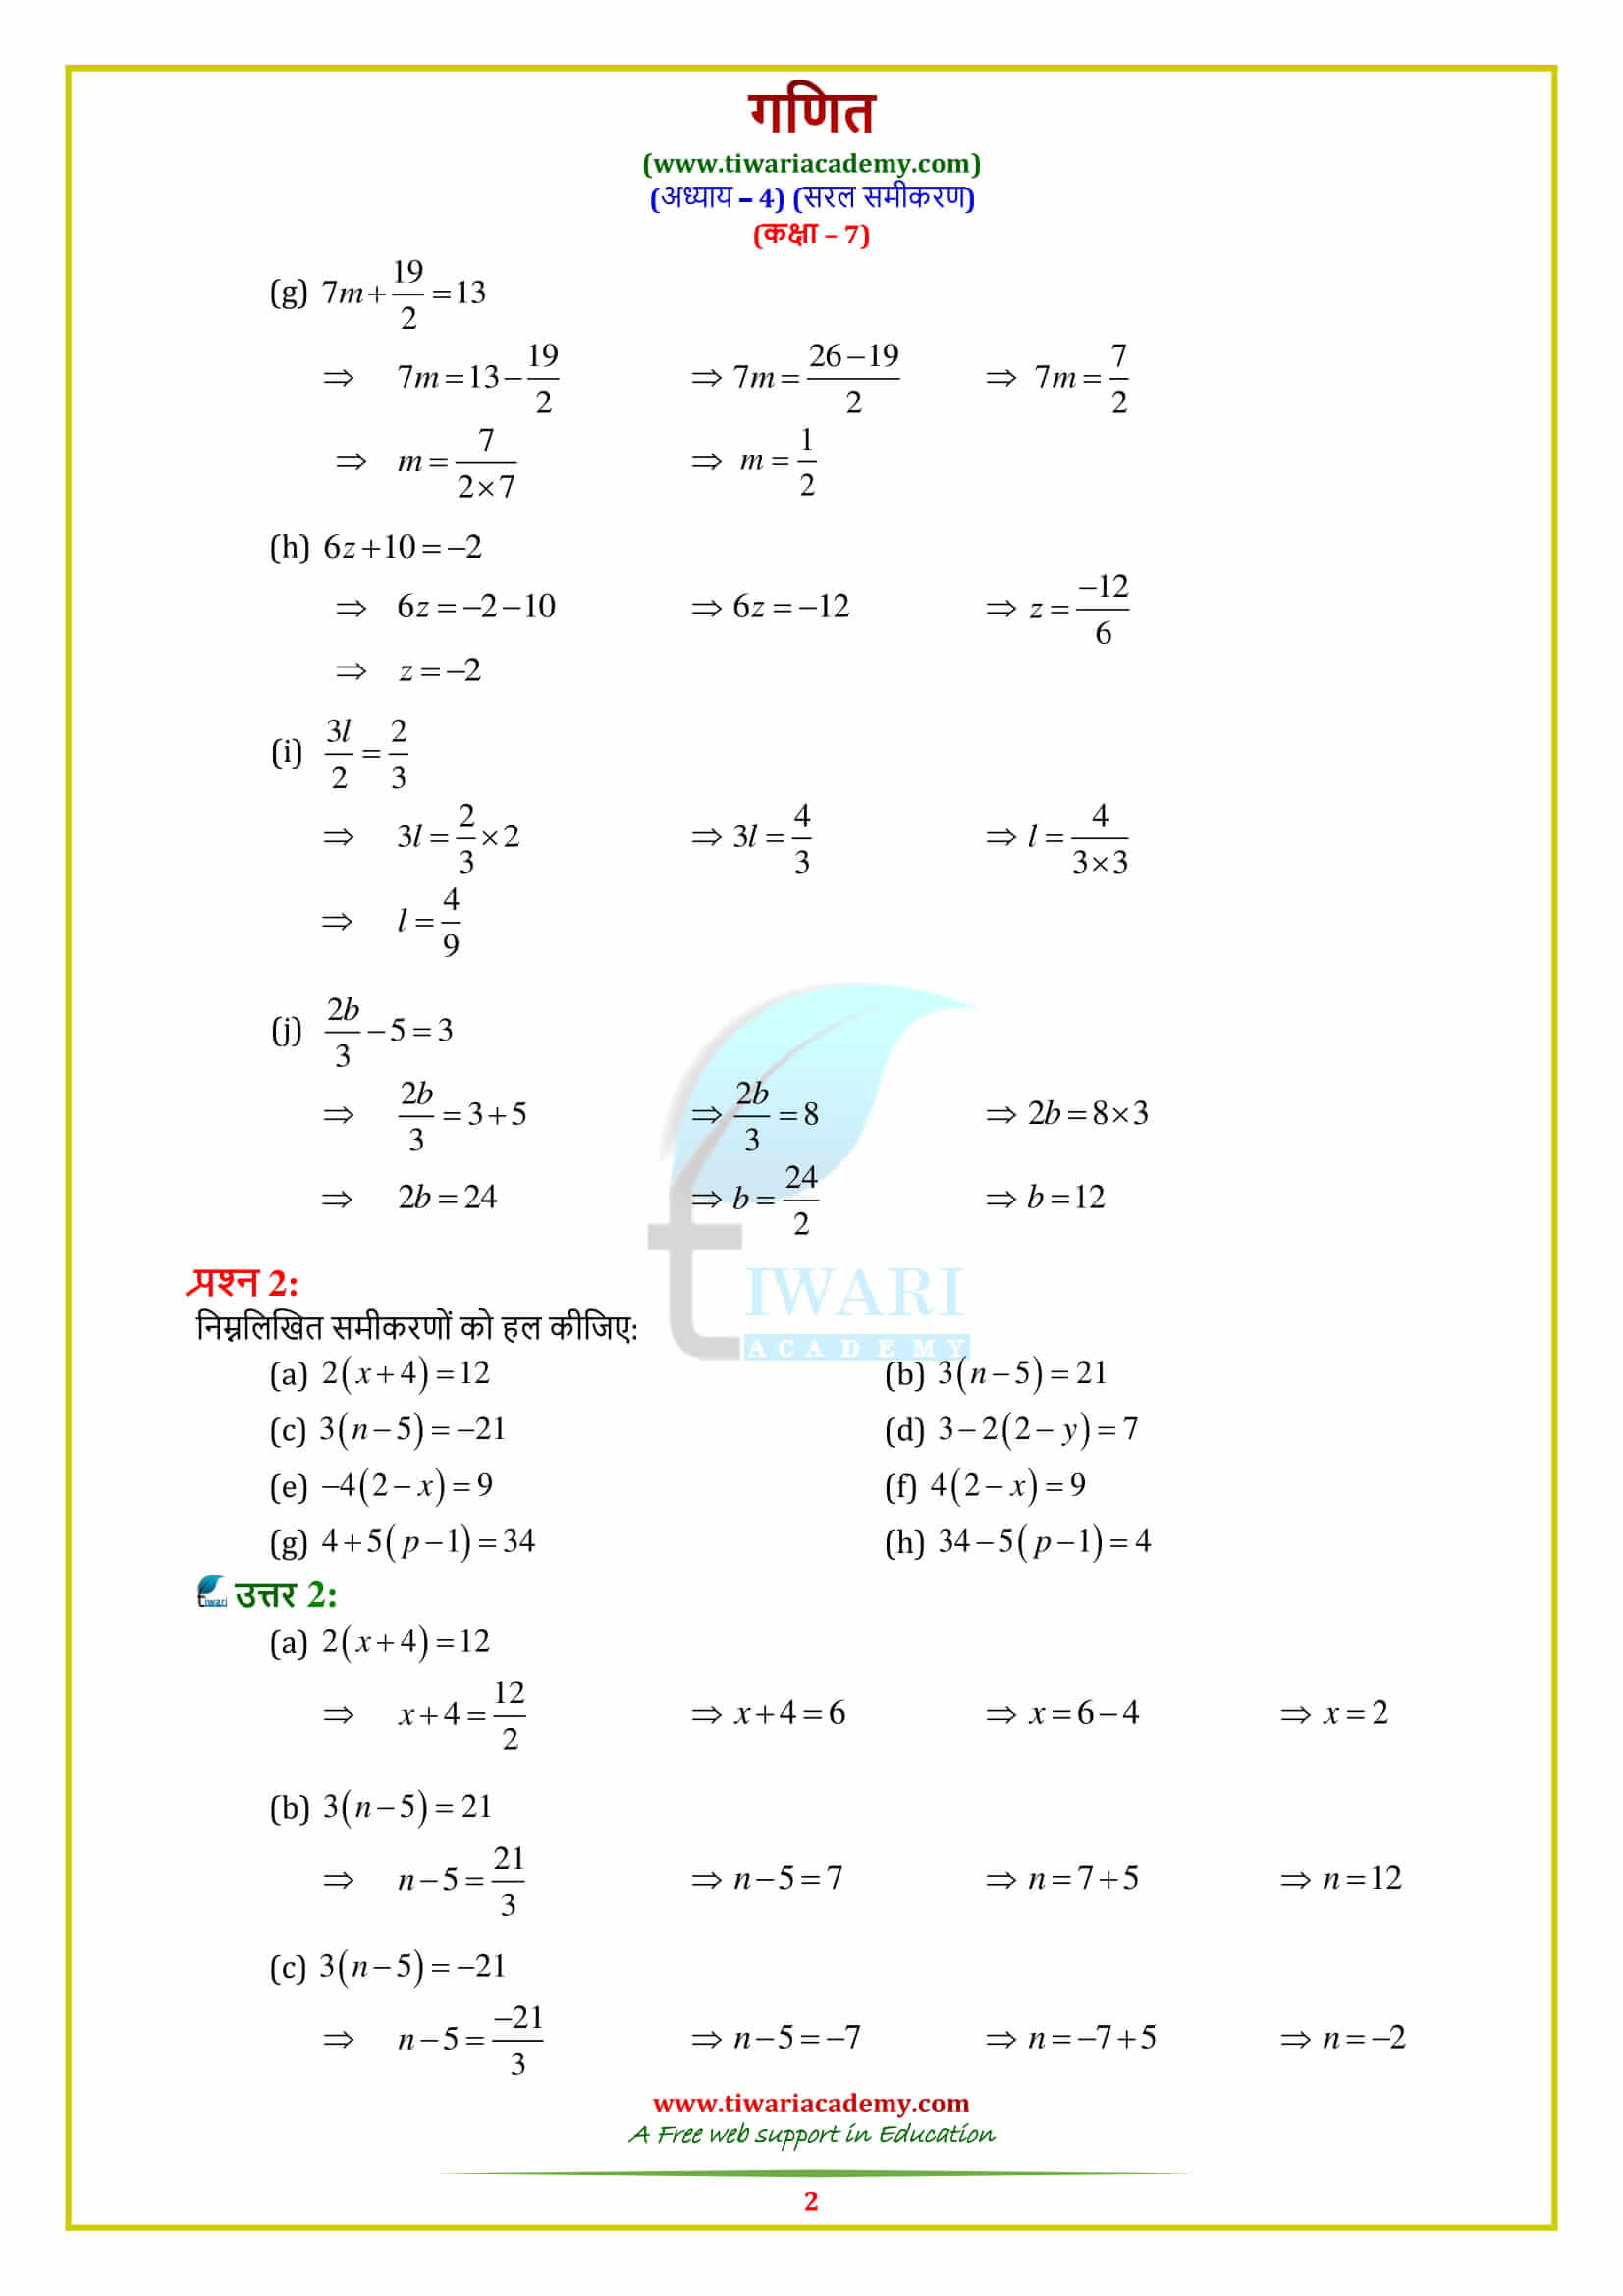 7 Maths Exercise 4.3 Solutions in pdf